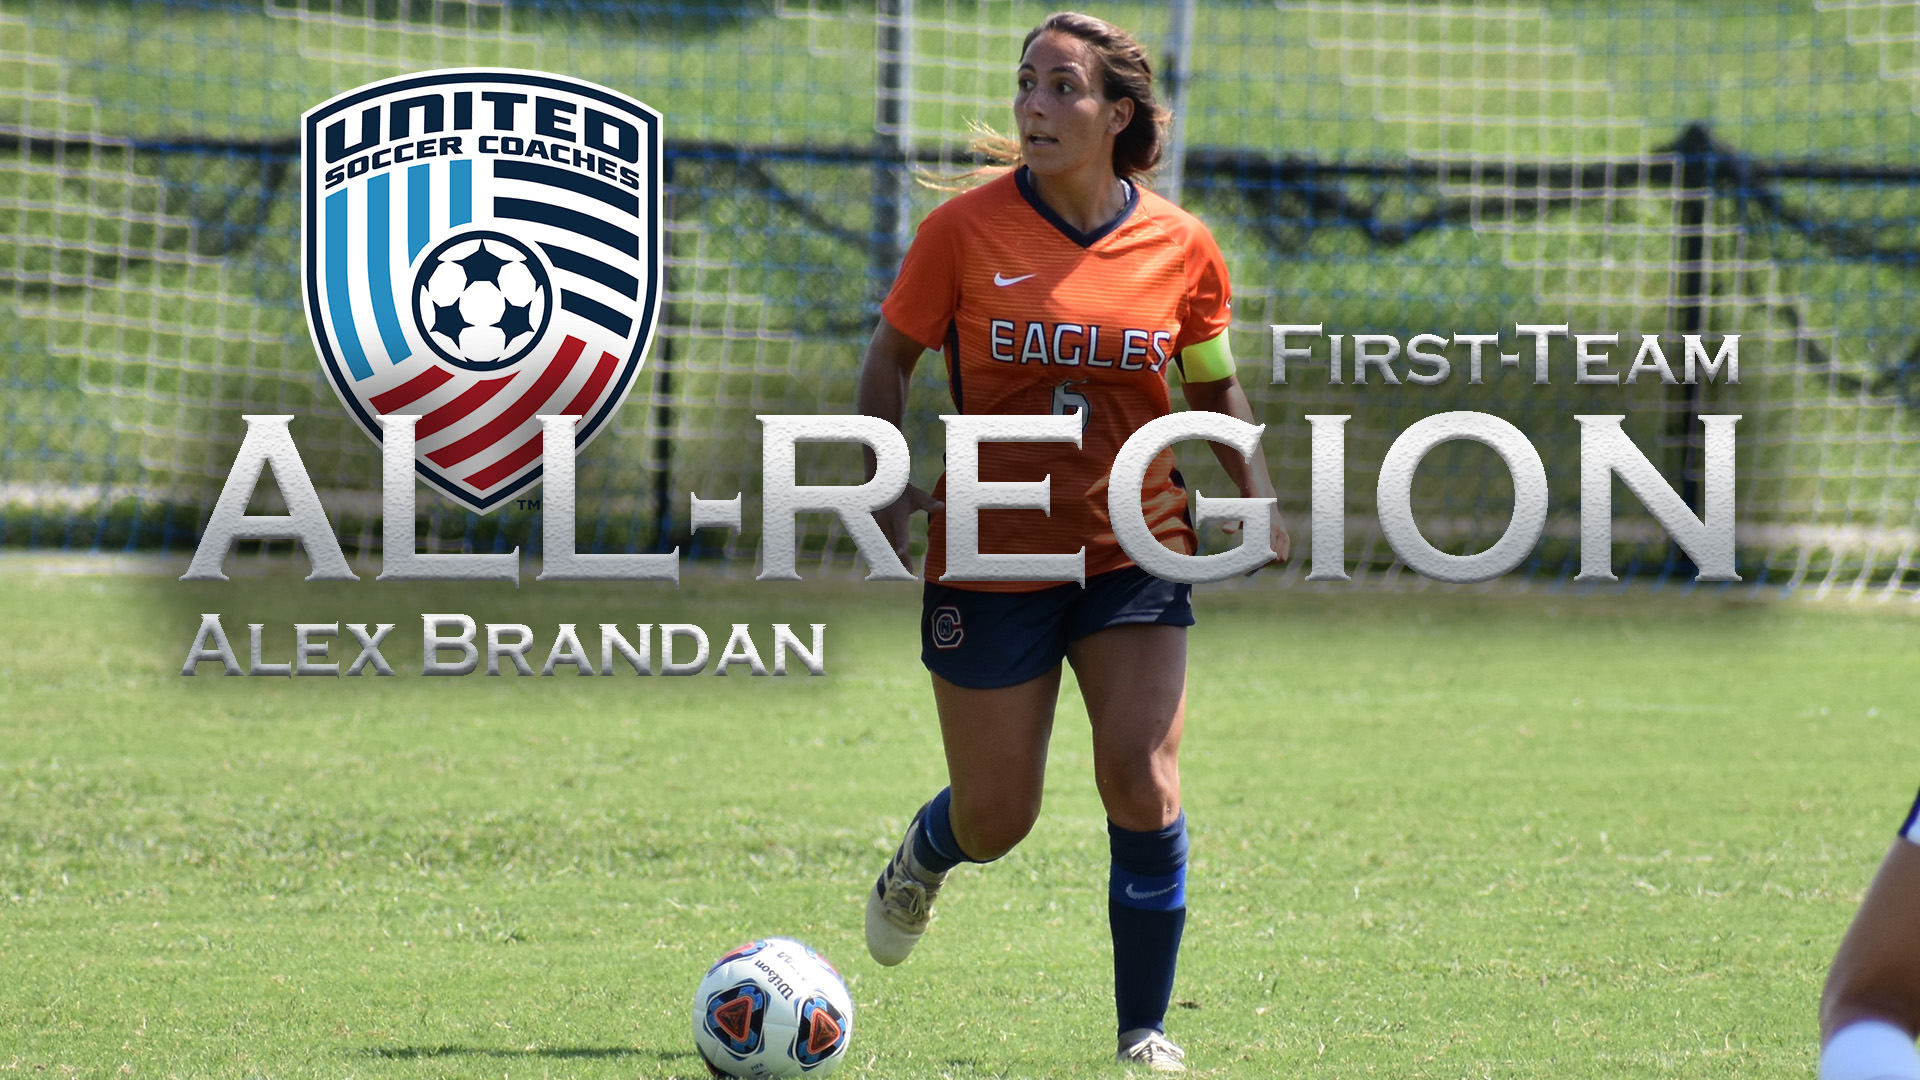 Eagles alter program records following the reveal of the USC All-Region teams